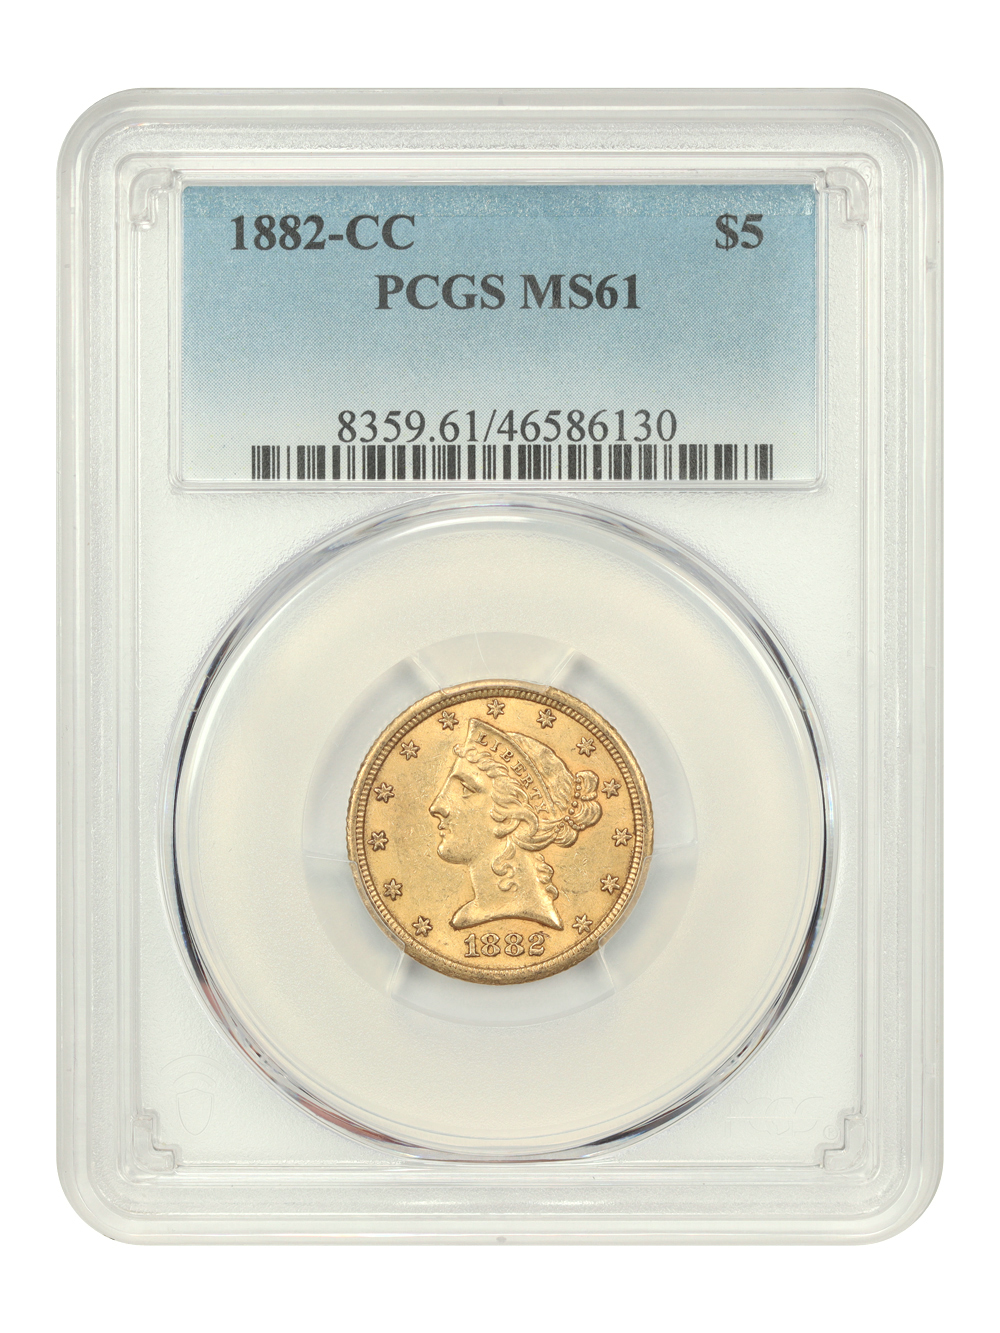 Primary image for 1882-CC $5 PCGS MS61